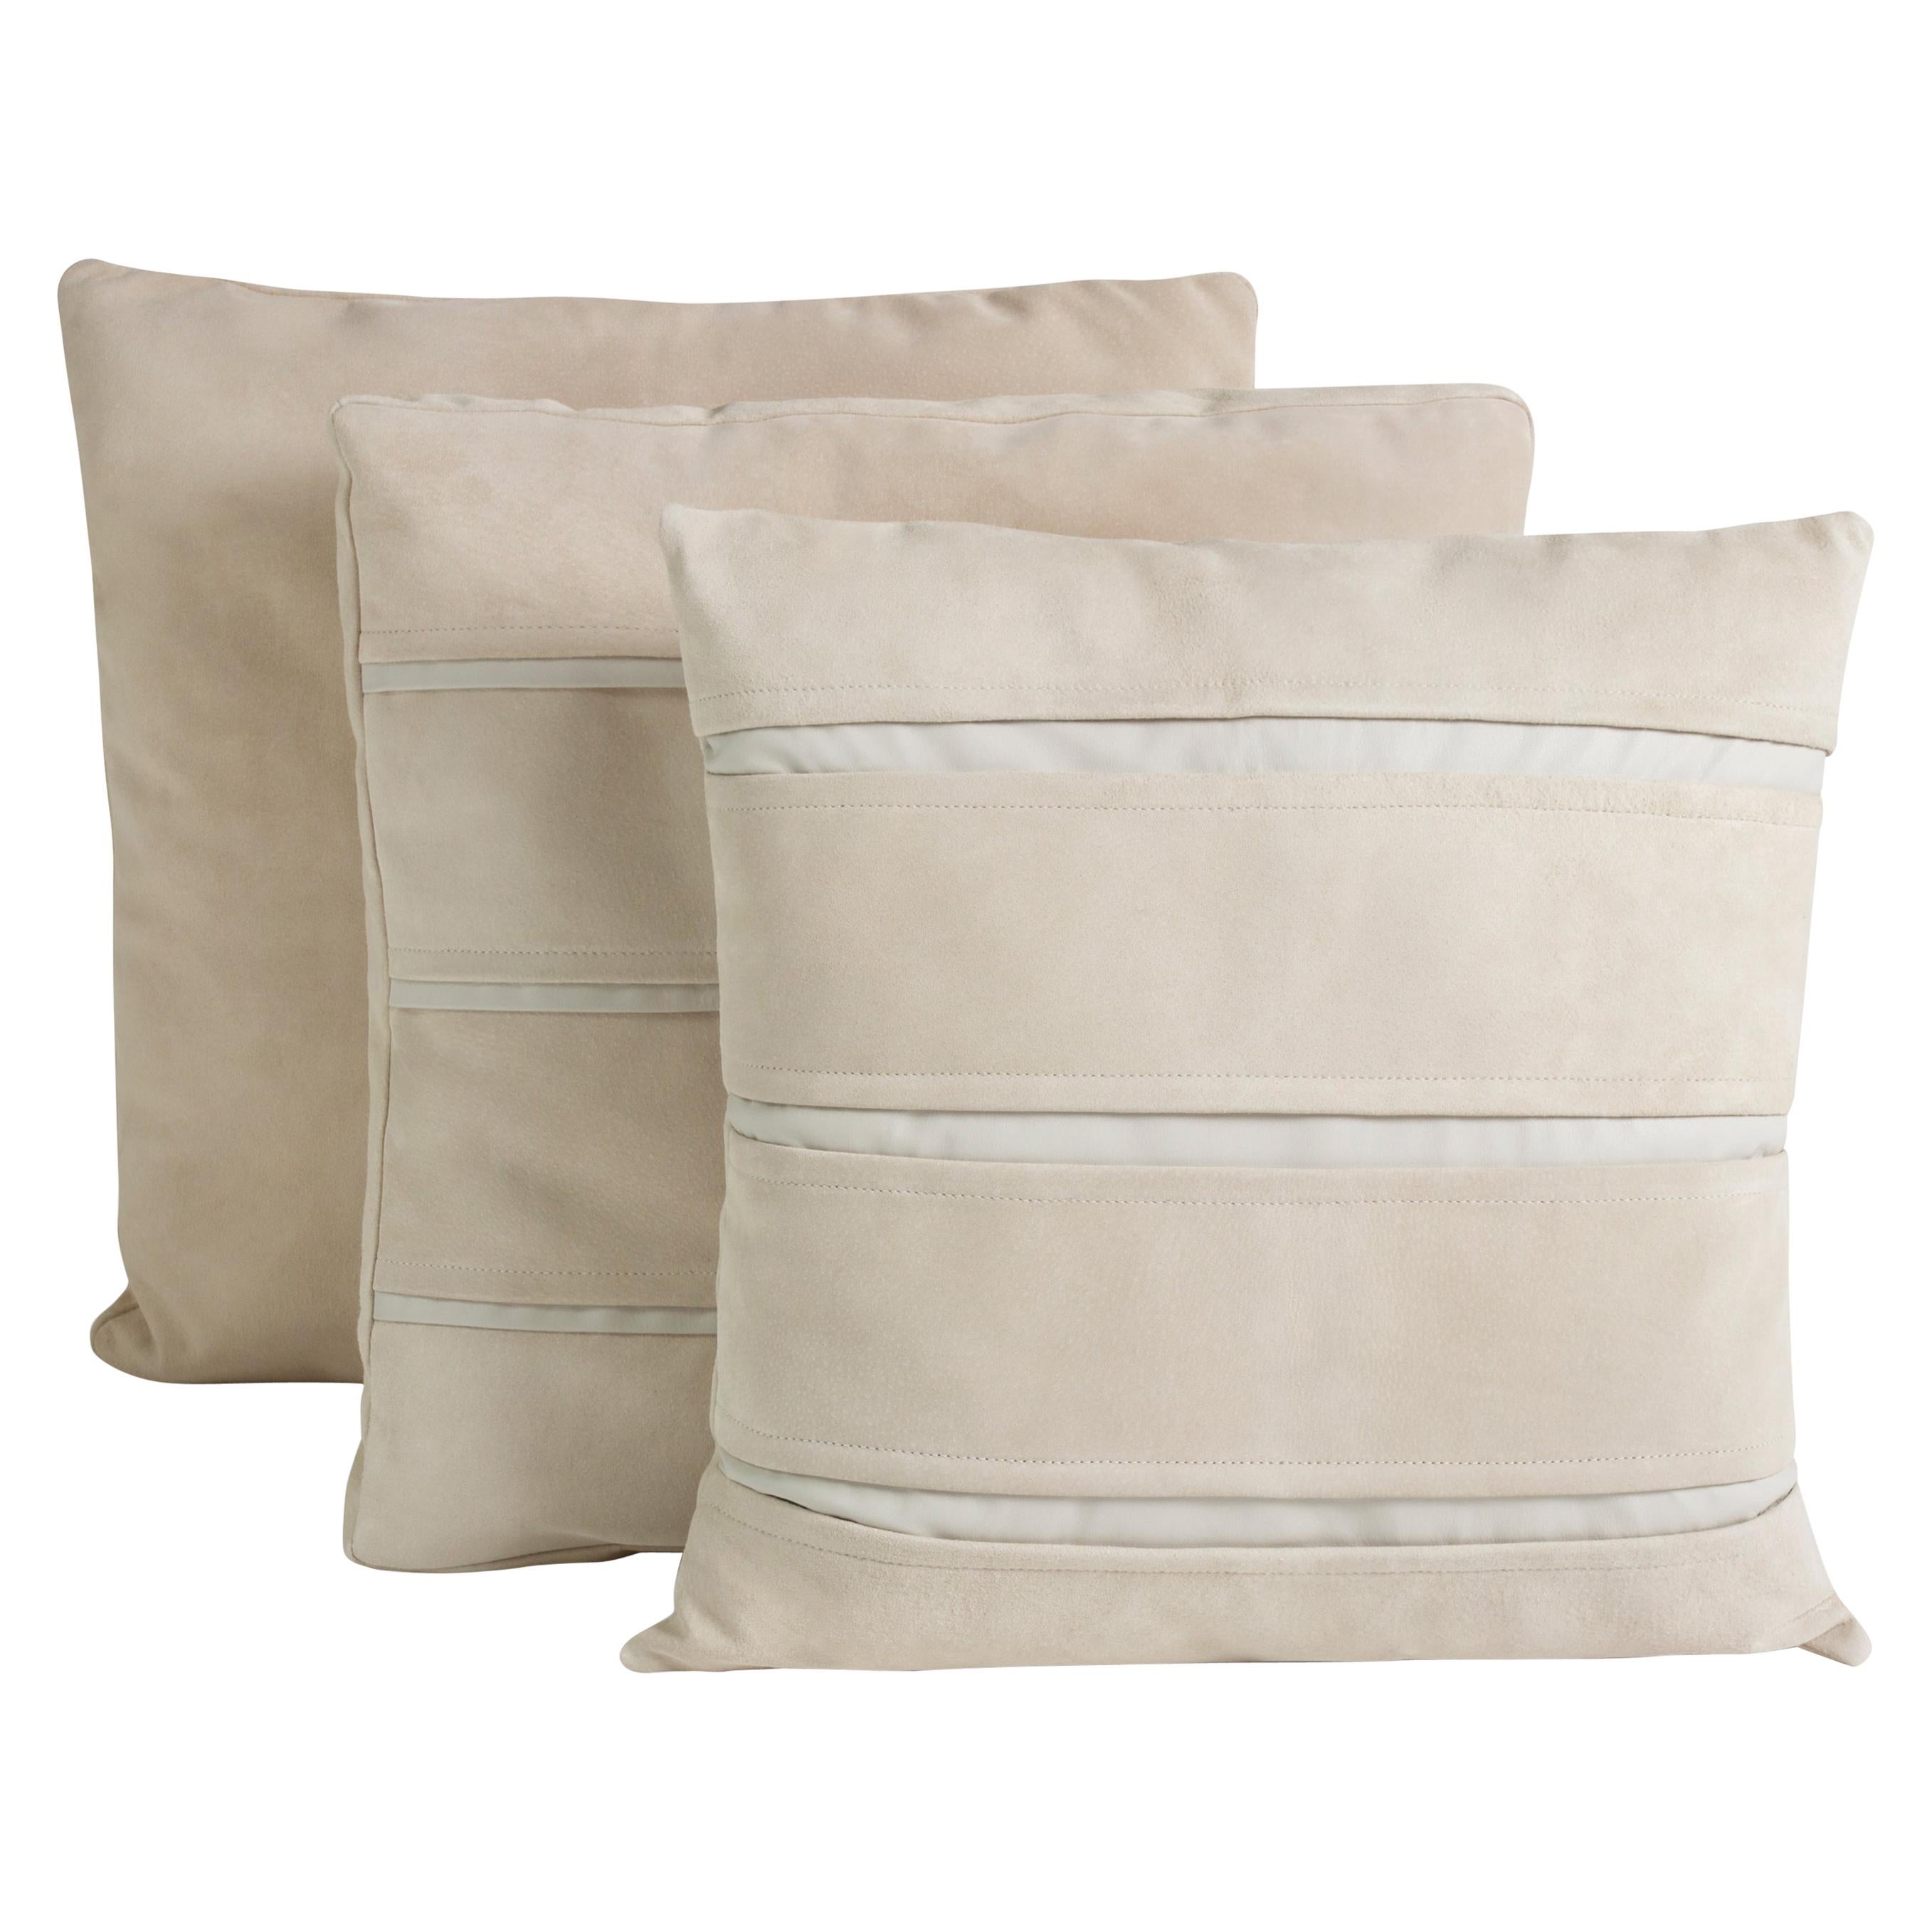 Brazilian Handcrafted Leather Throw Pillows